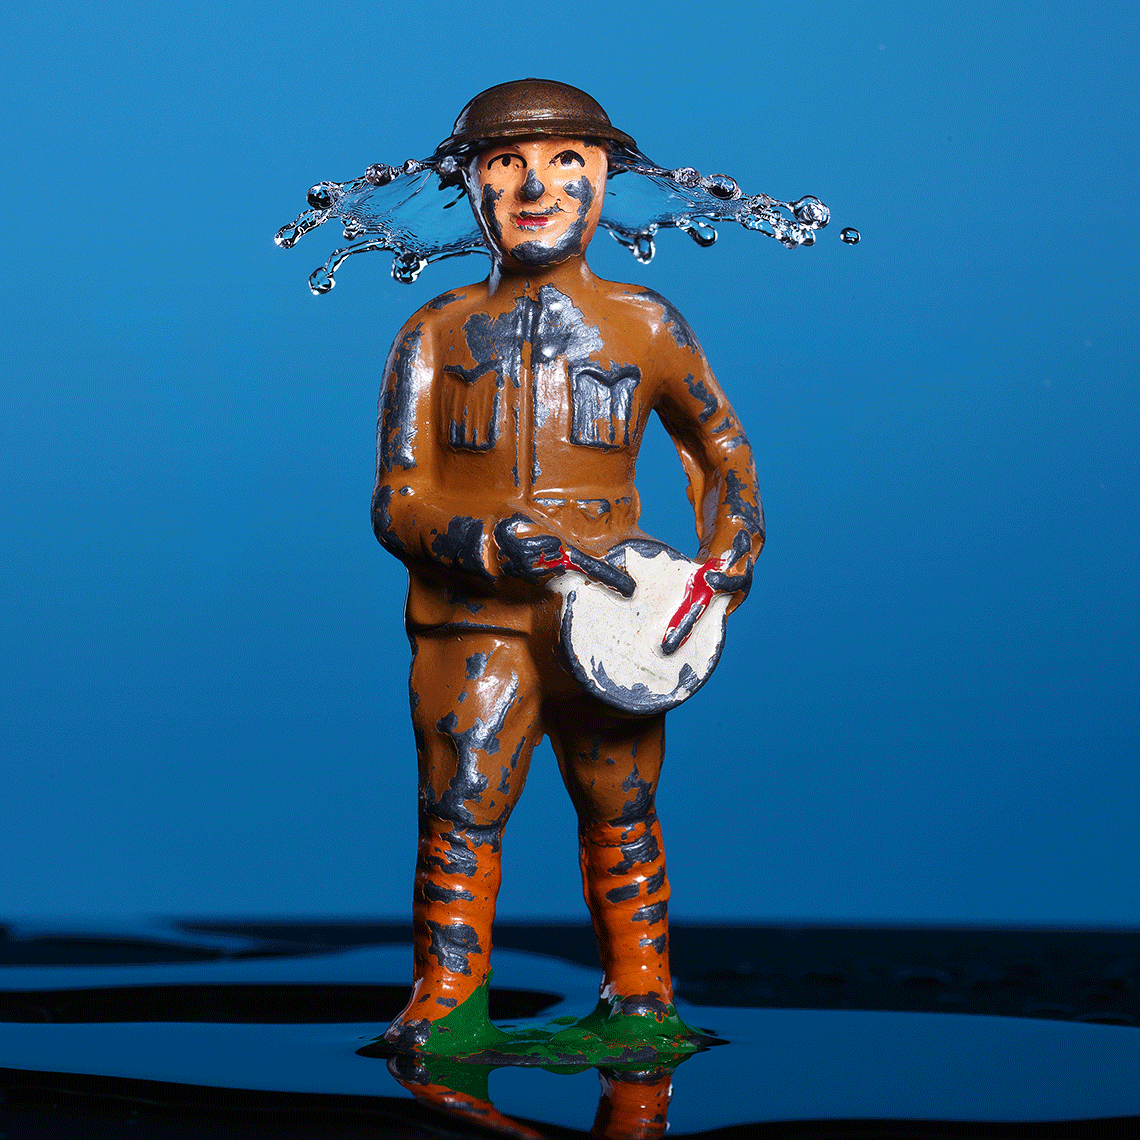 Wet Toy Soldier — Animated Splash Photography